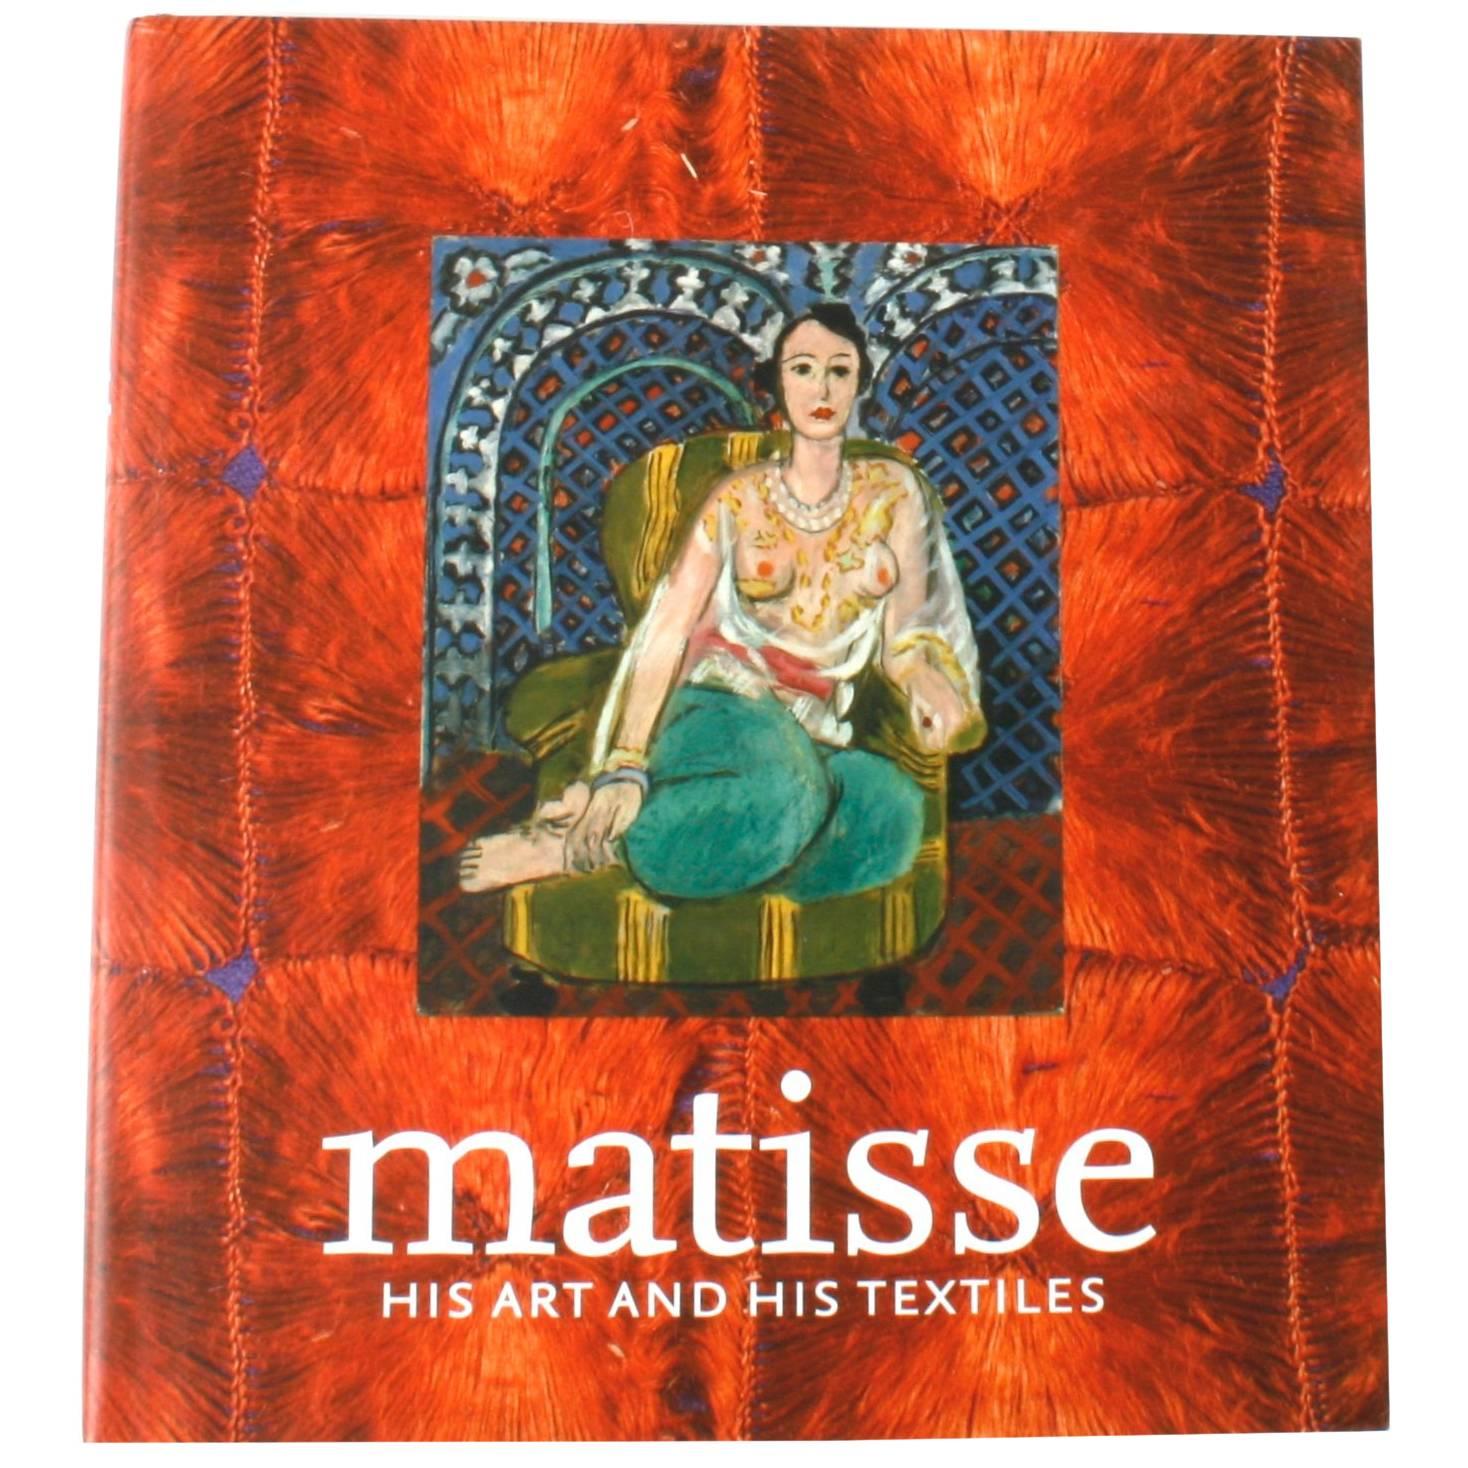 Matisse His Art and His Textiles, The Fabric of Dreams, First Edition